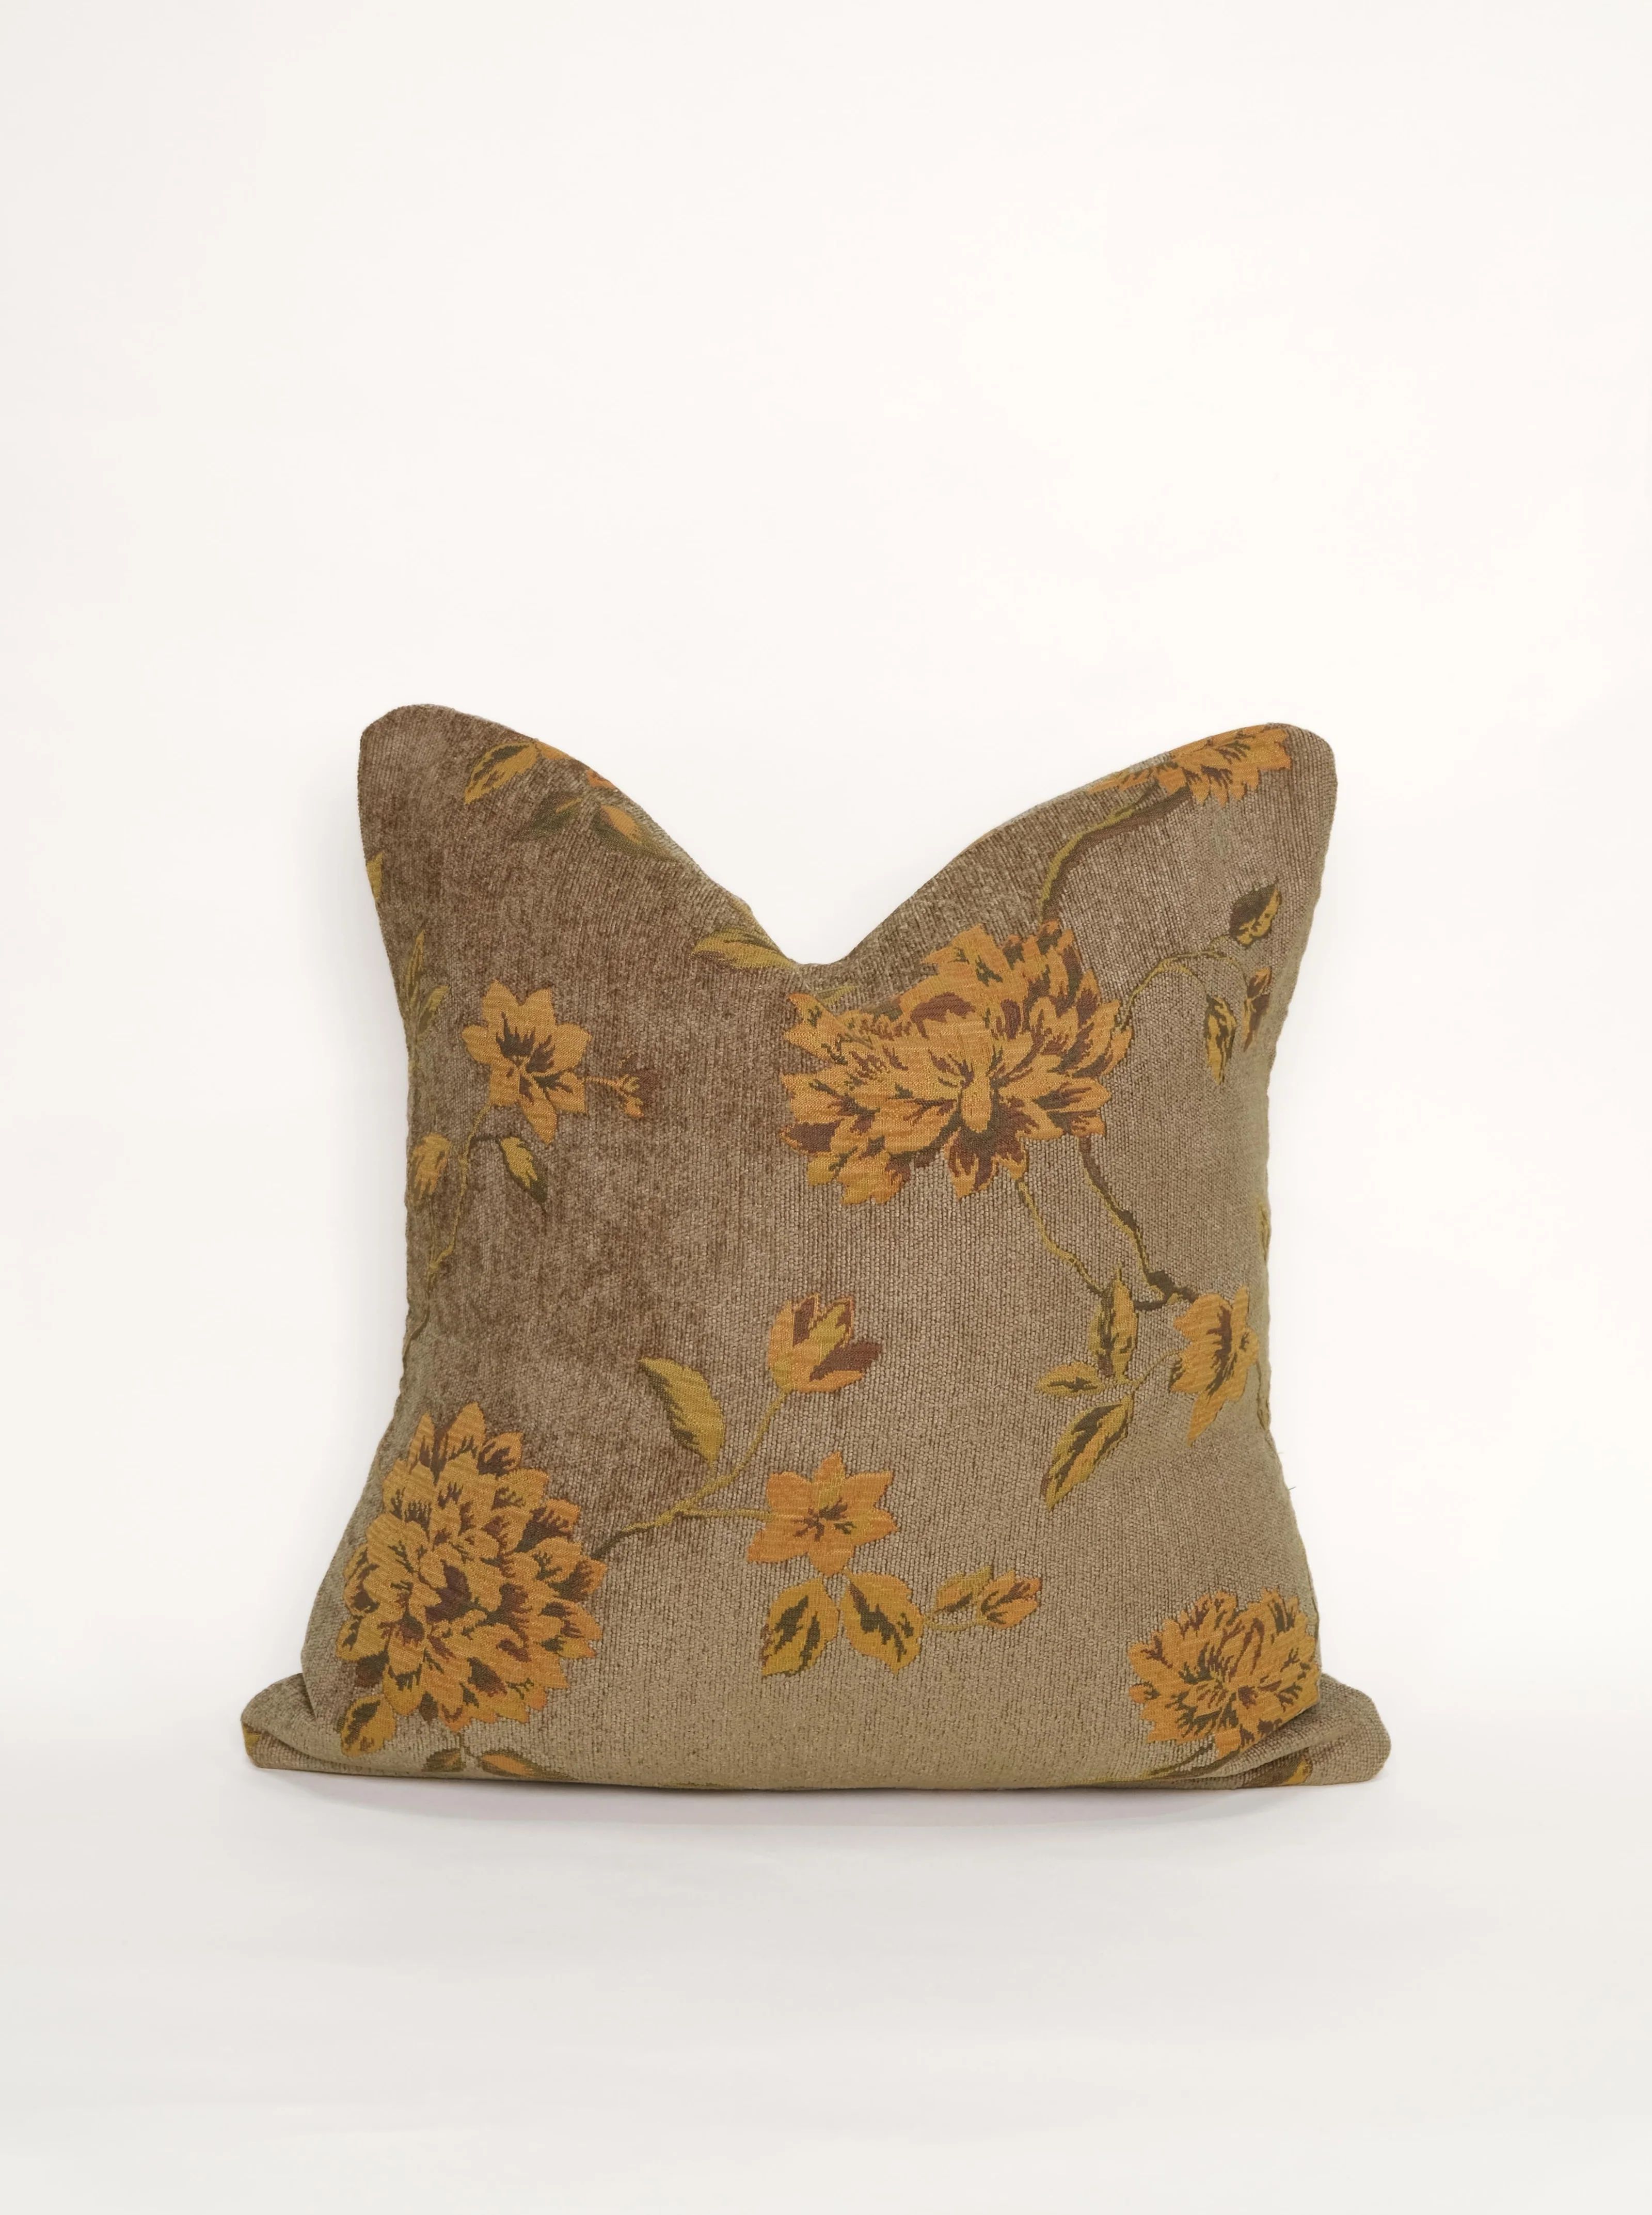 Charlotte Tapestry Pillow | Twenty Third by Deanne (US)